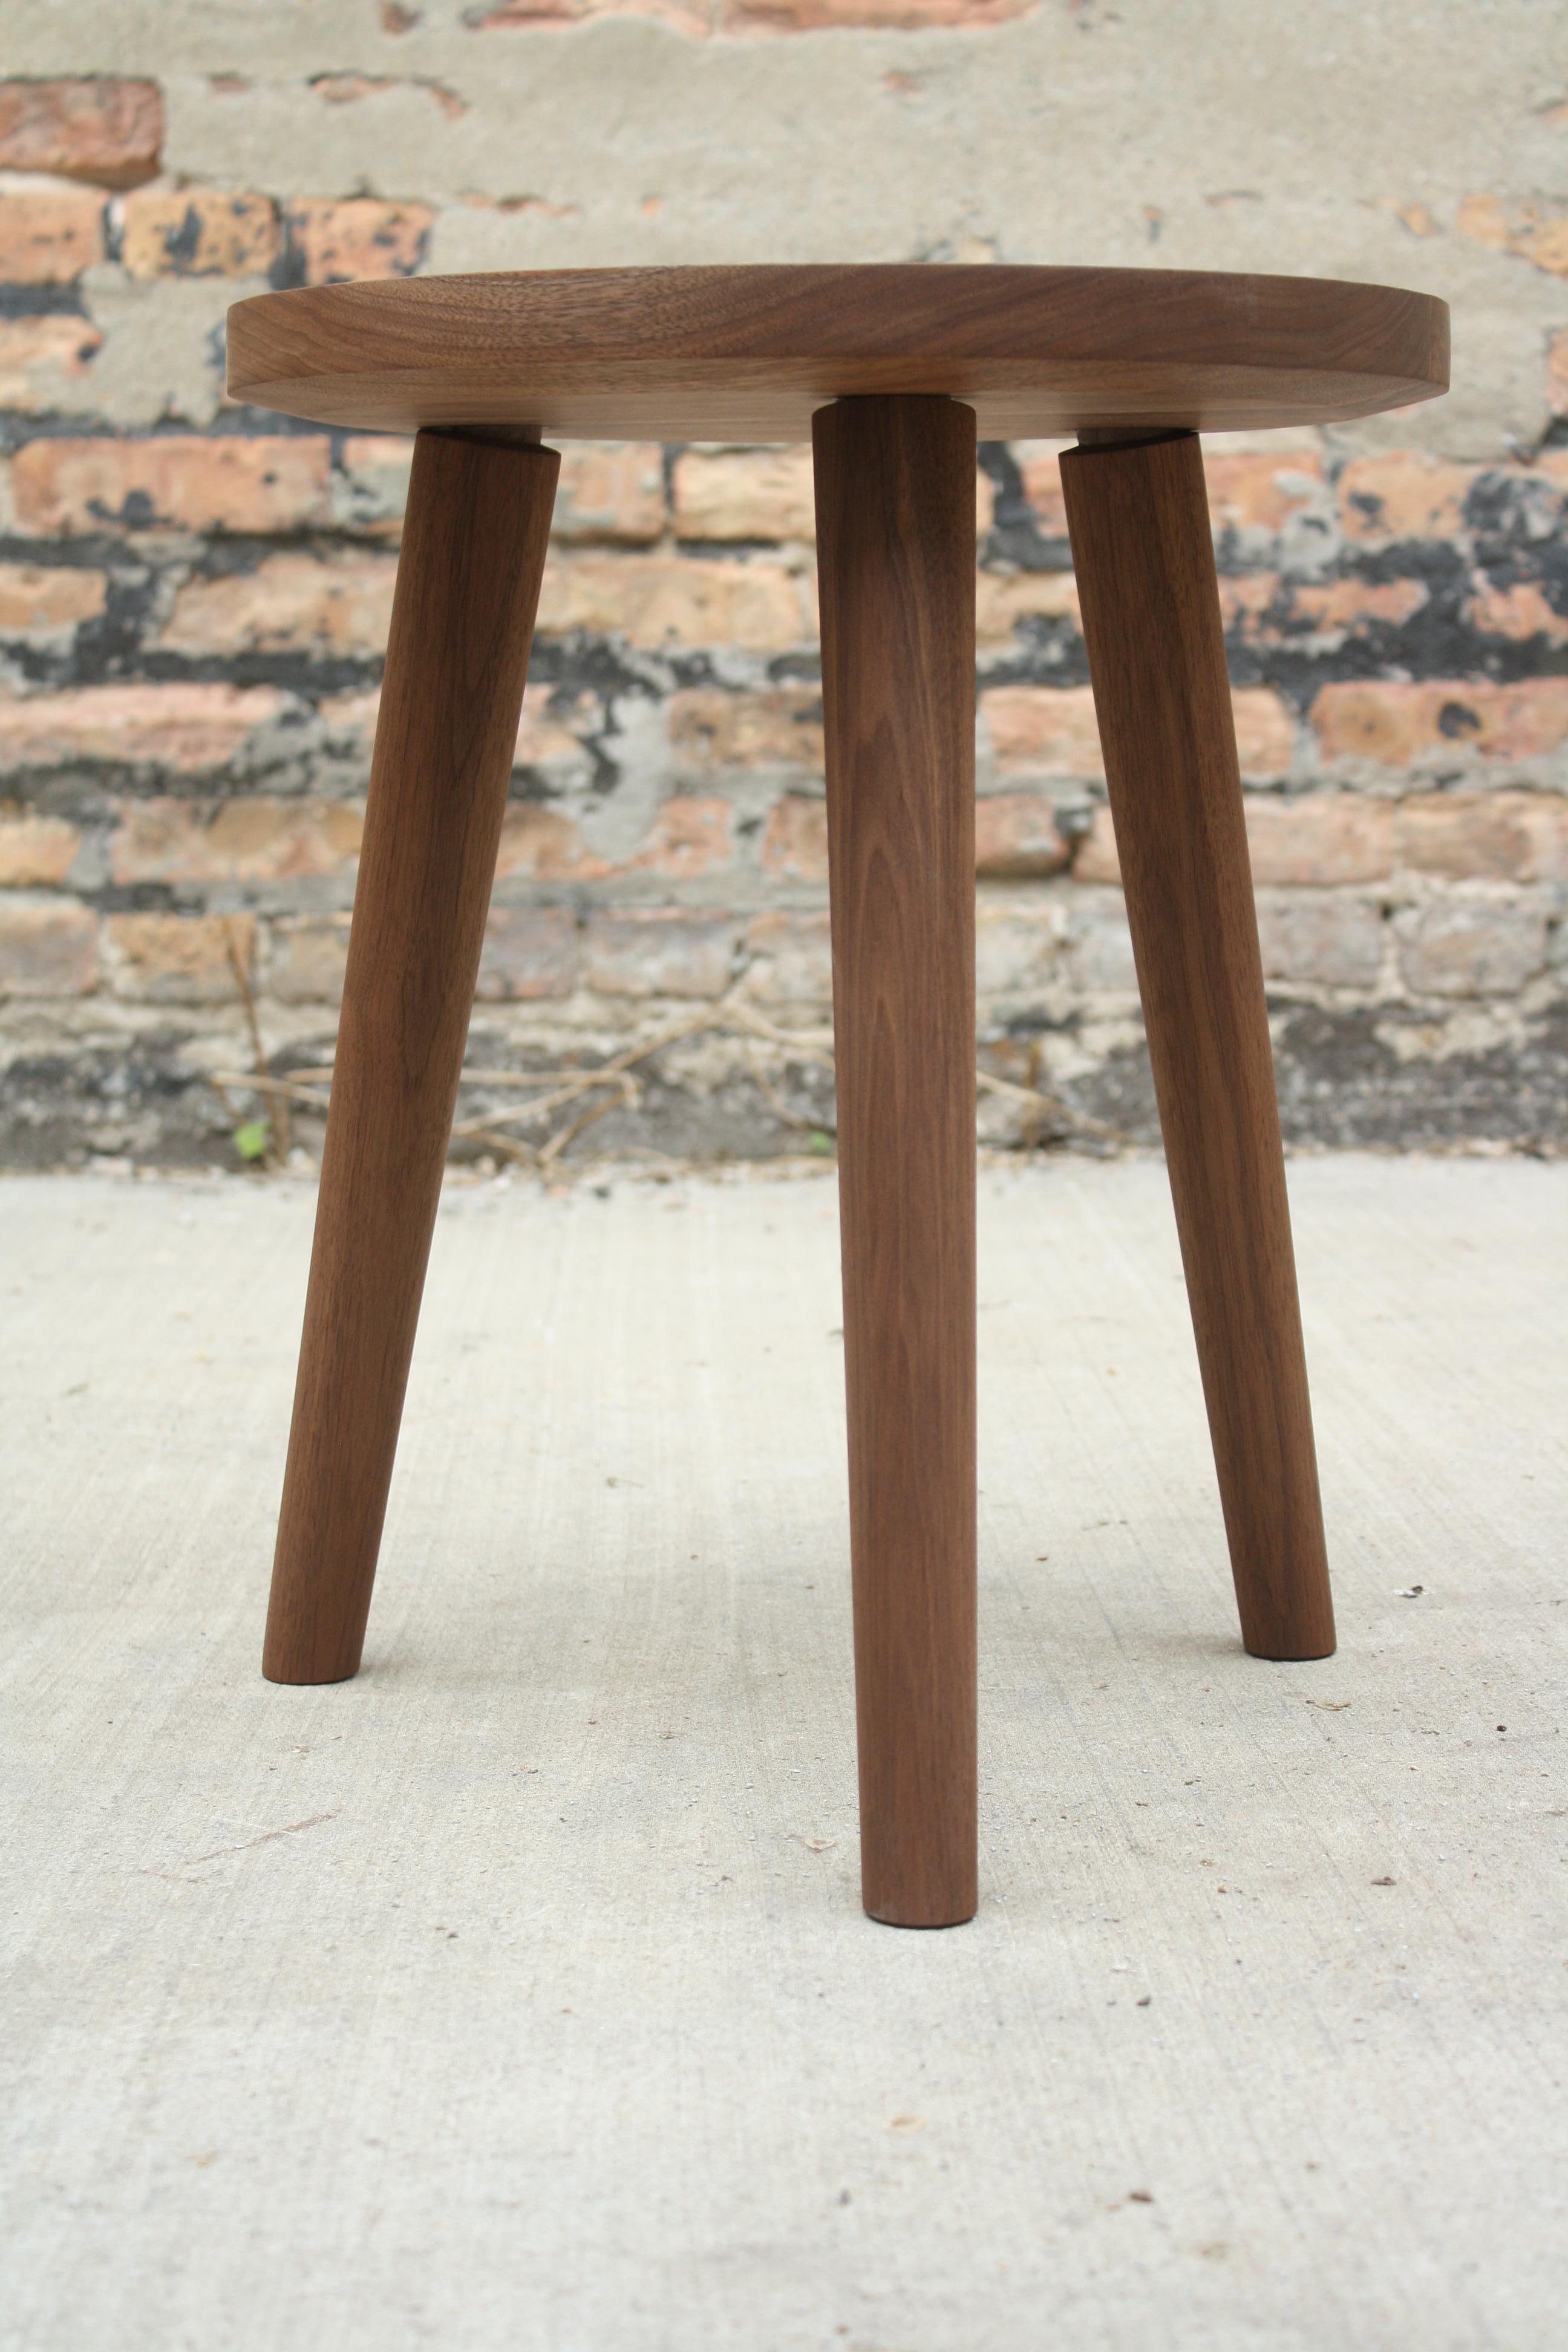 Bare a Handmade Wood Table by Laylo Studio In New Condition For Sale In Chicago, IL